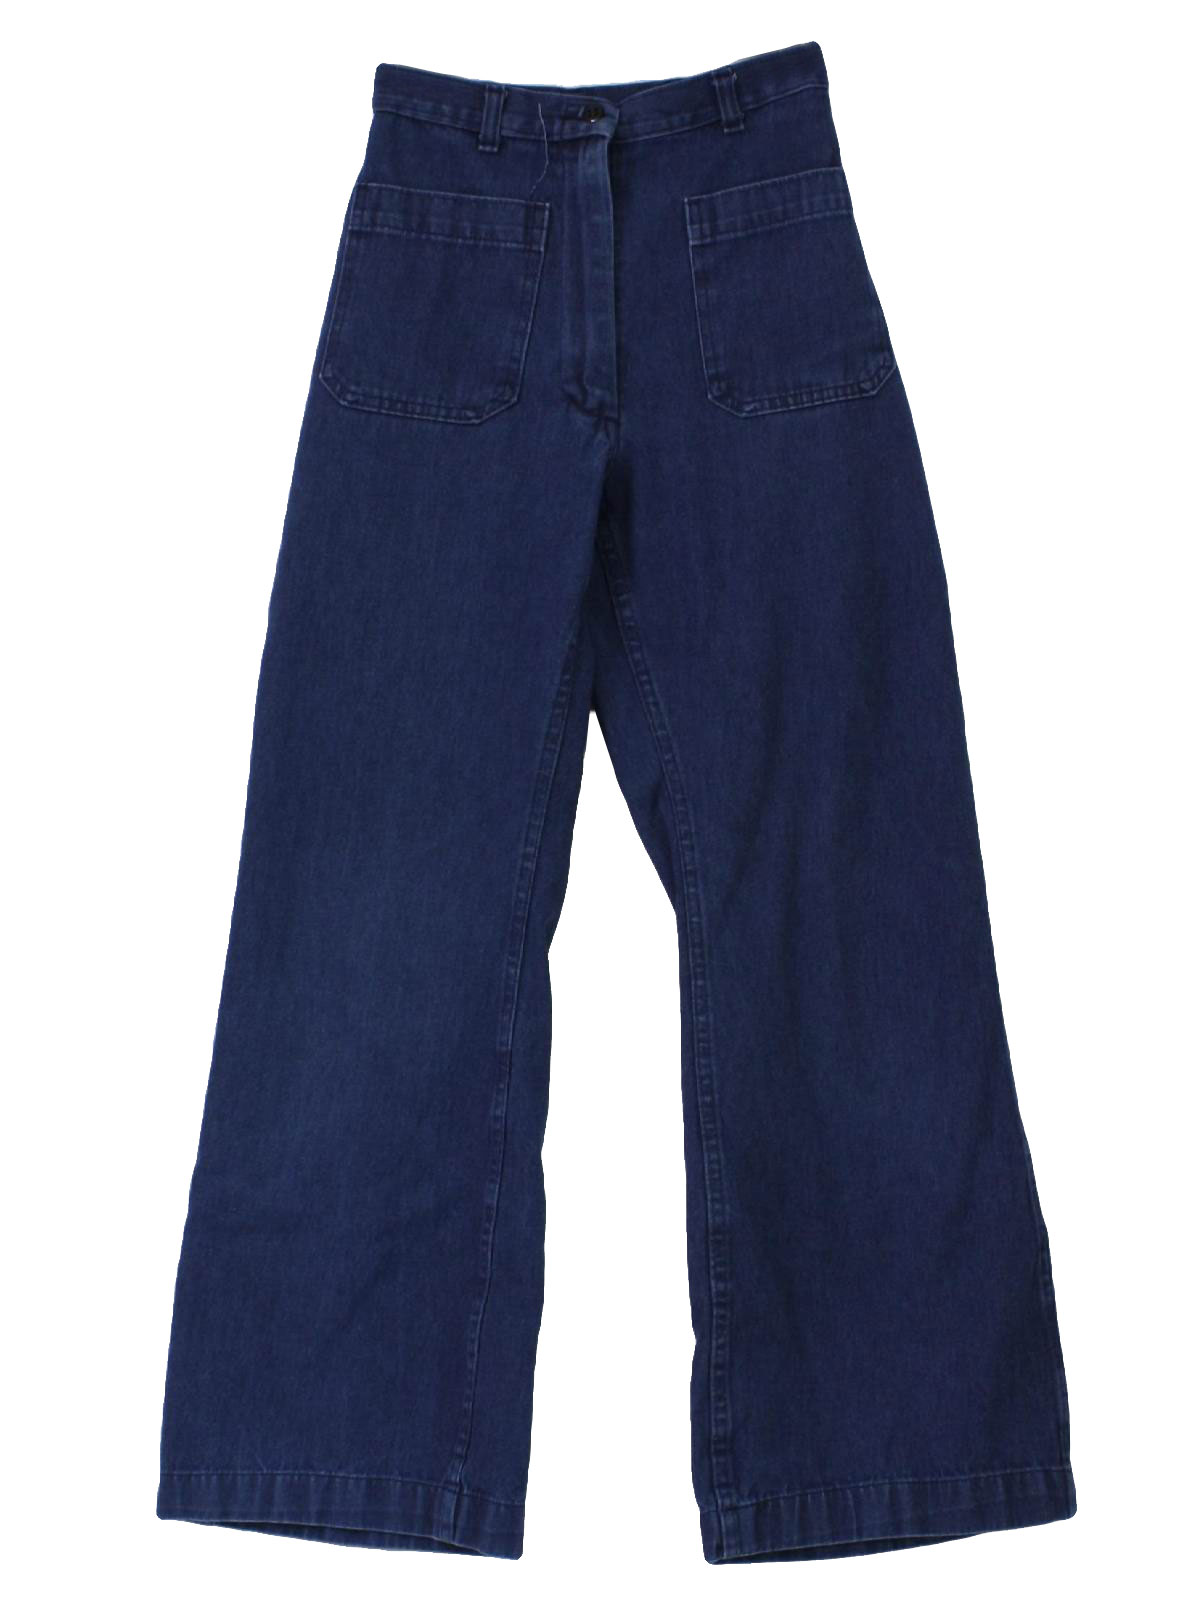 70s Vintage Utility Trousers Bellbottom Pants: 70s -Utility Trousers ...